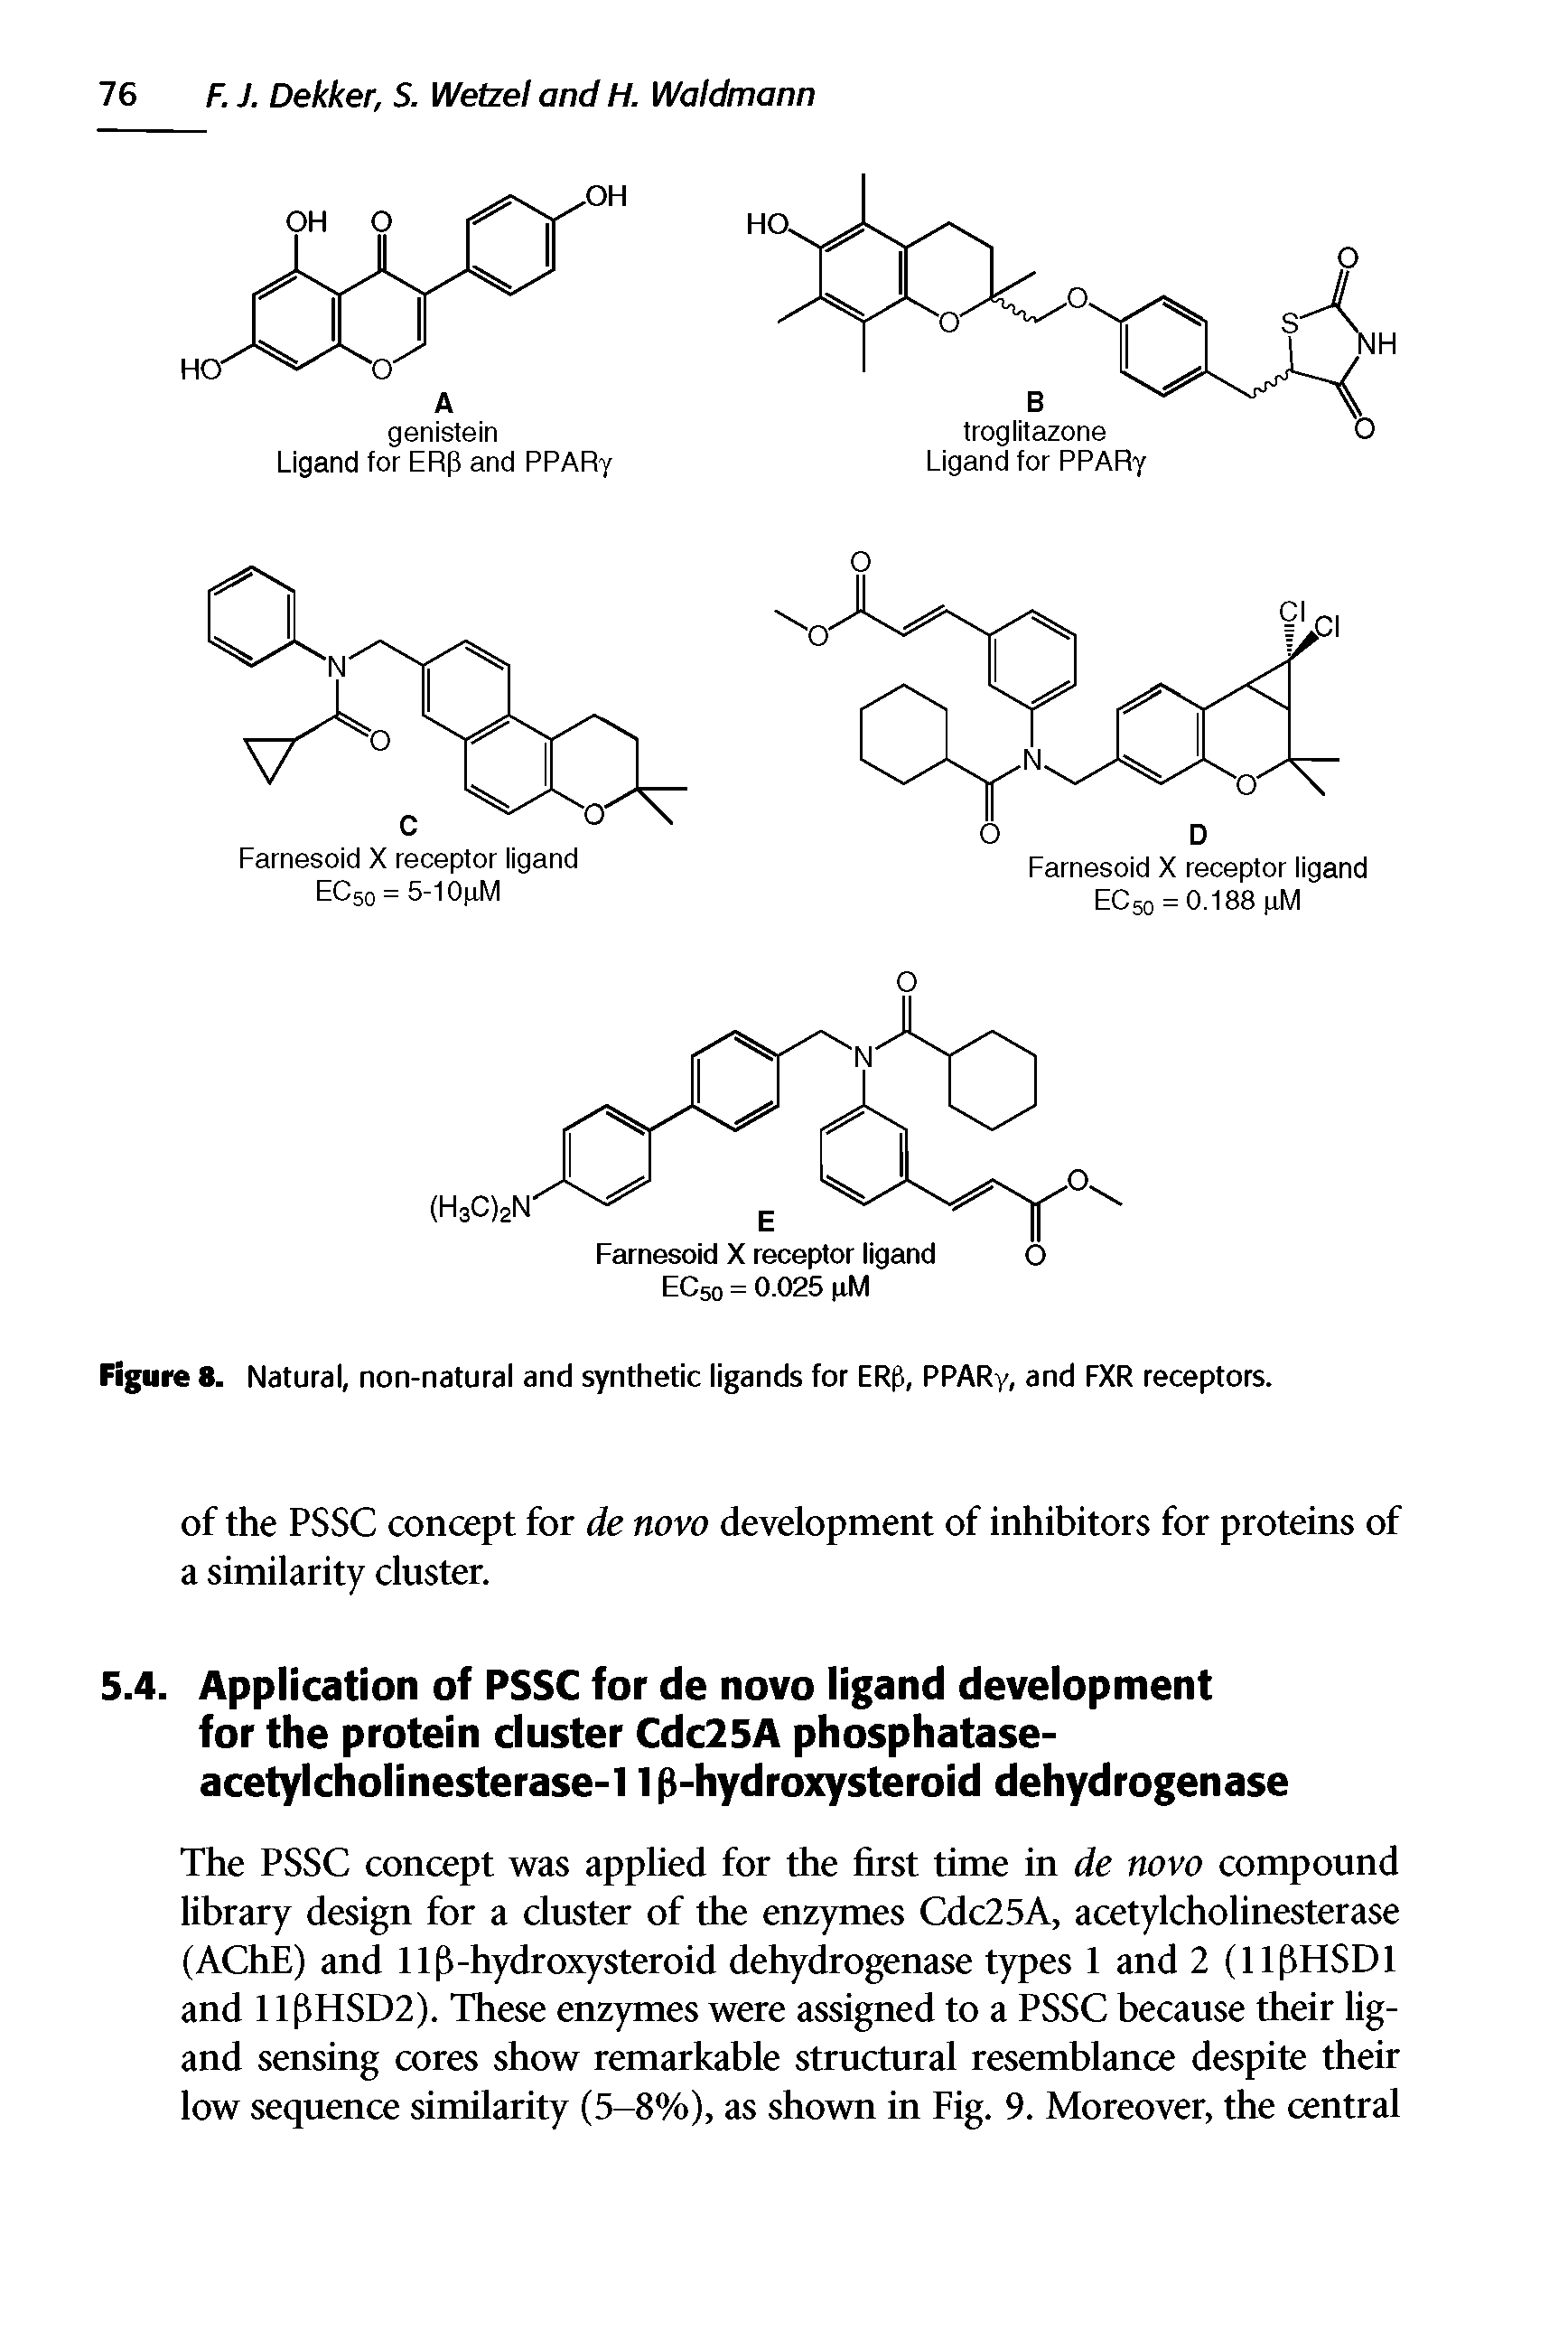 Figure 8. Natural, non-natural and synthetic ligands for ERft, PPARy, and FXR receptors.